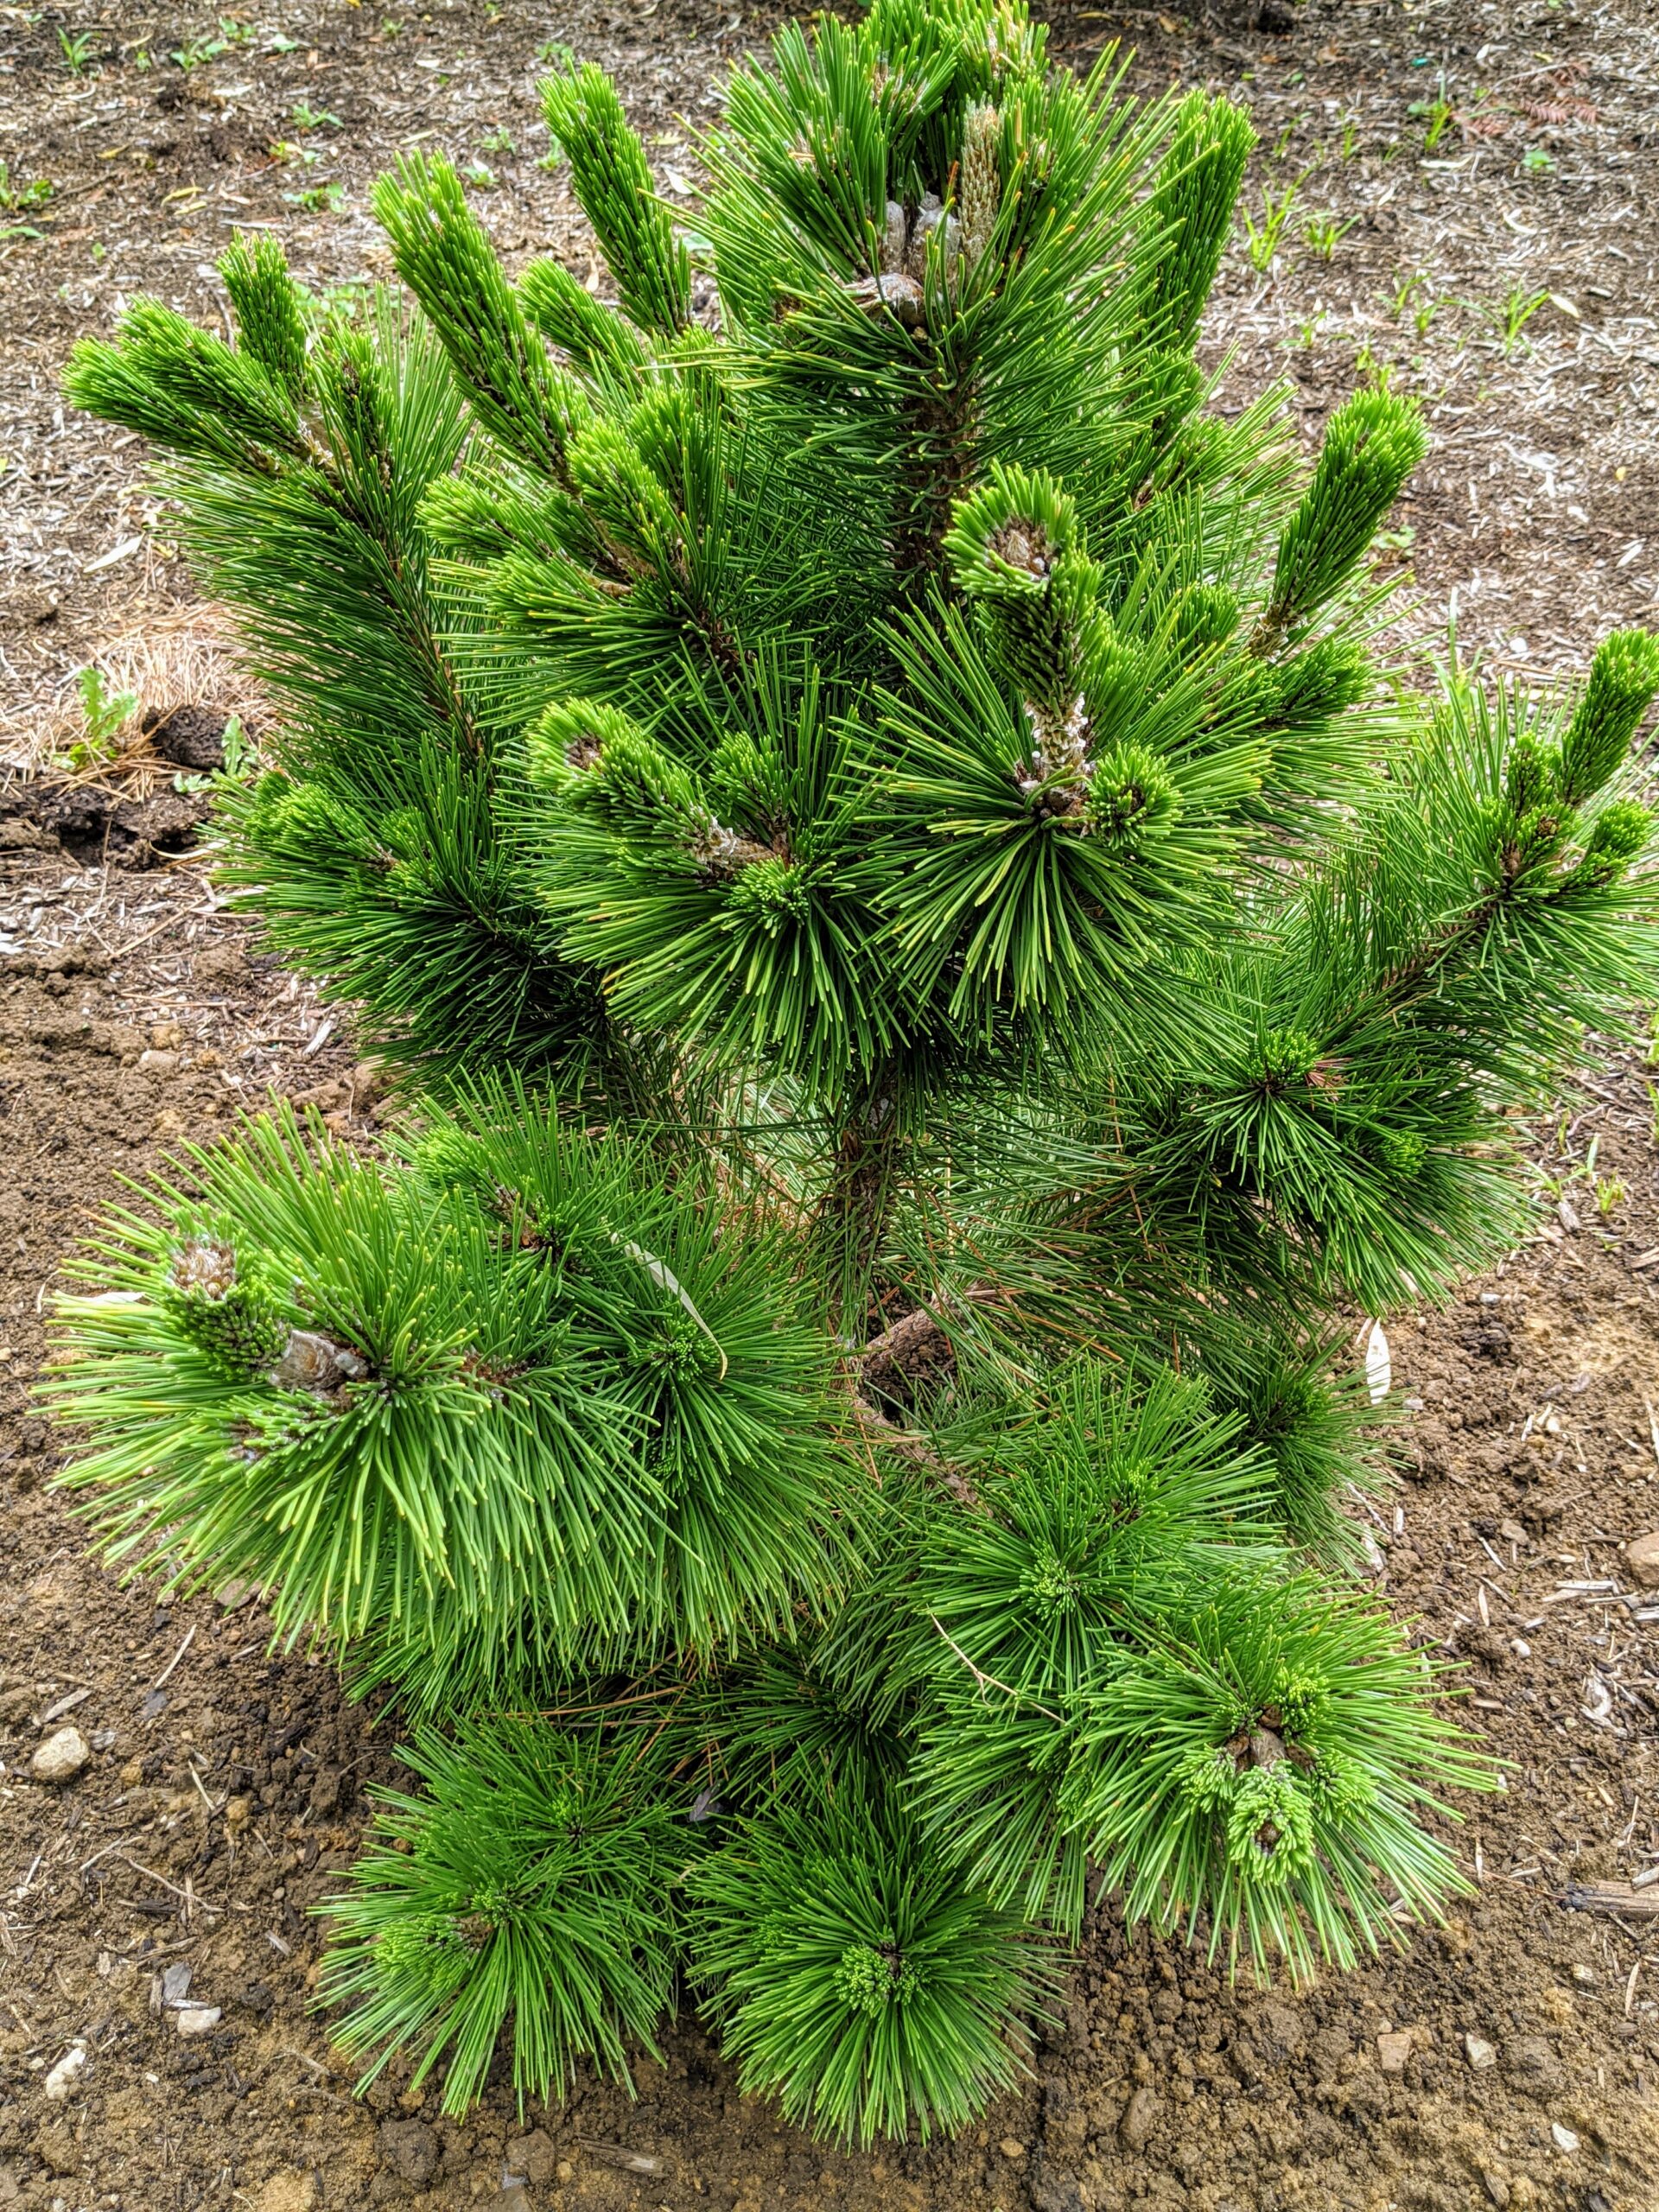 Pinus thunbergii 'Thunderhead' is a compact black pine that only ...